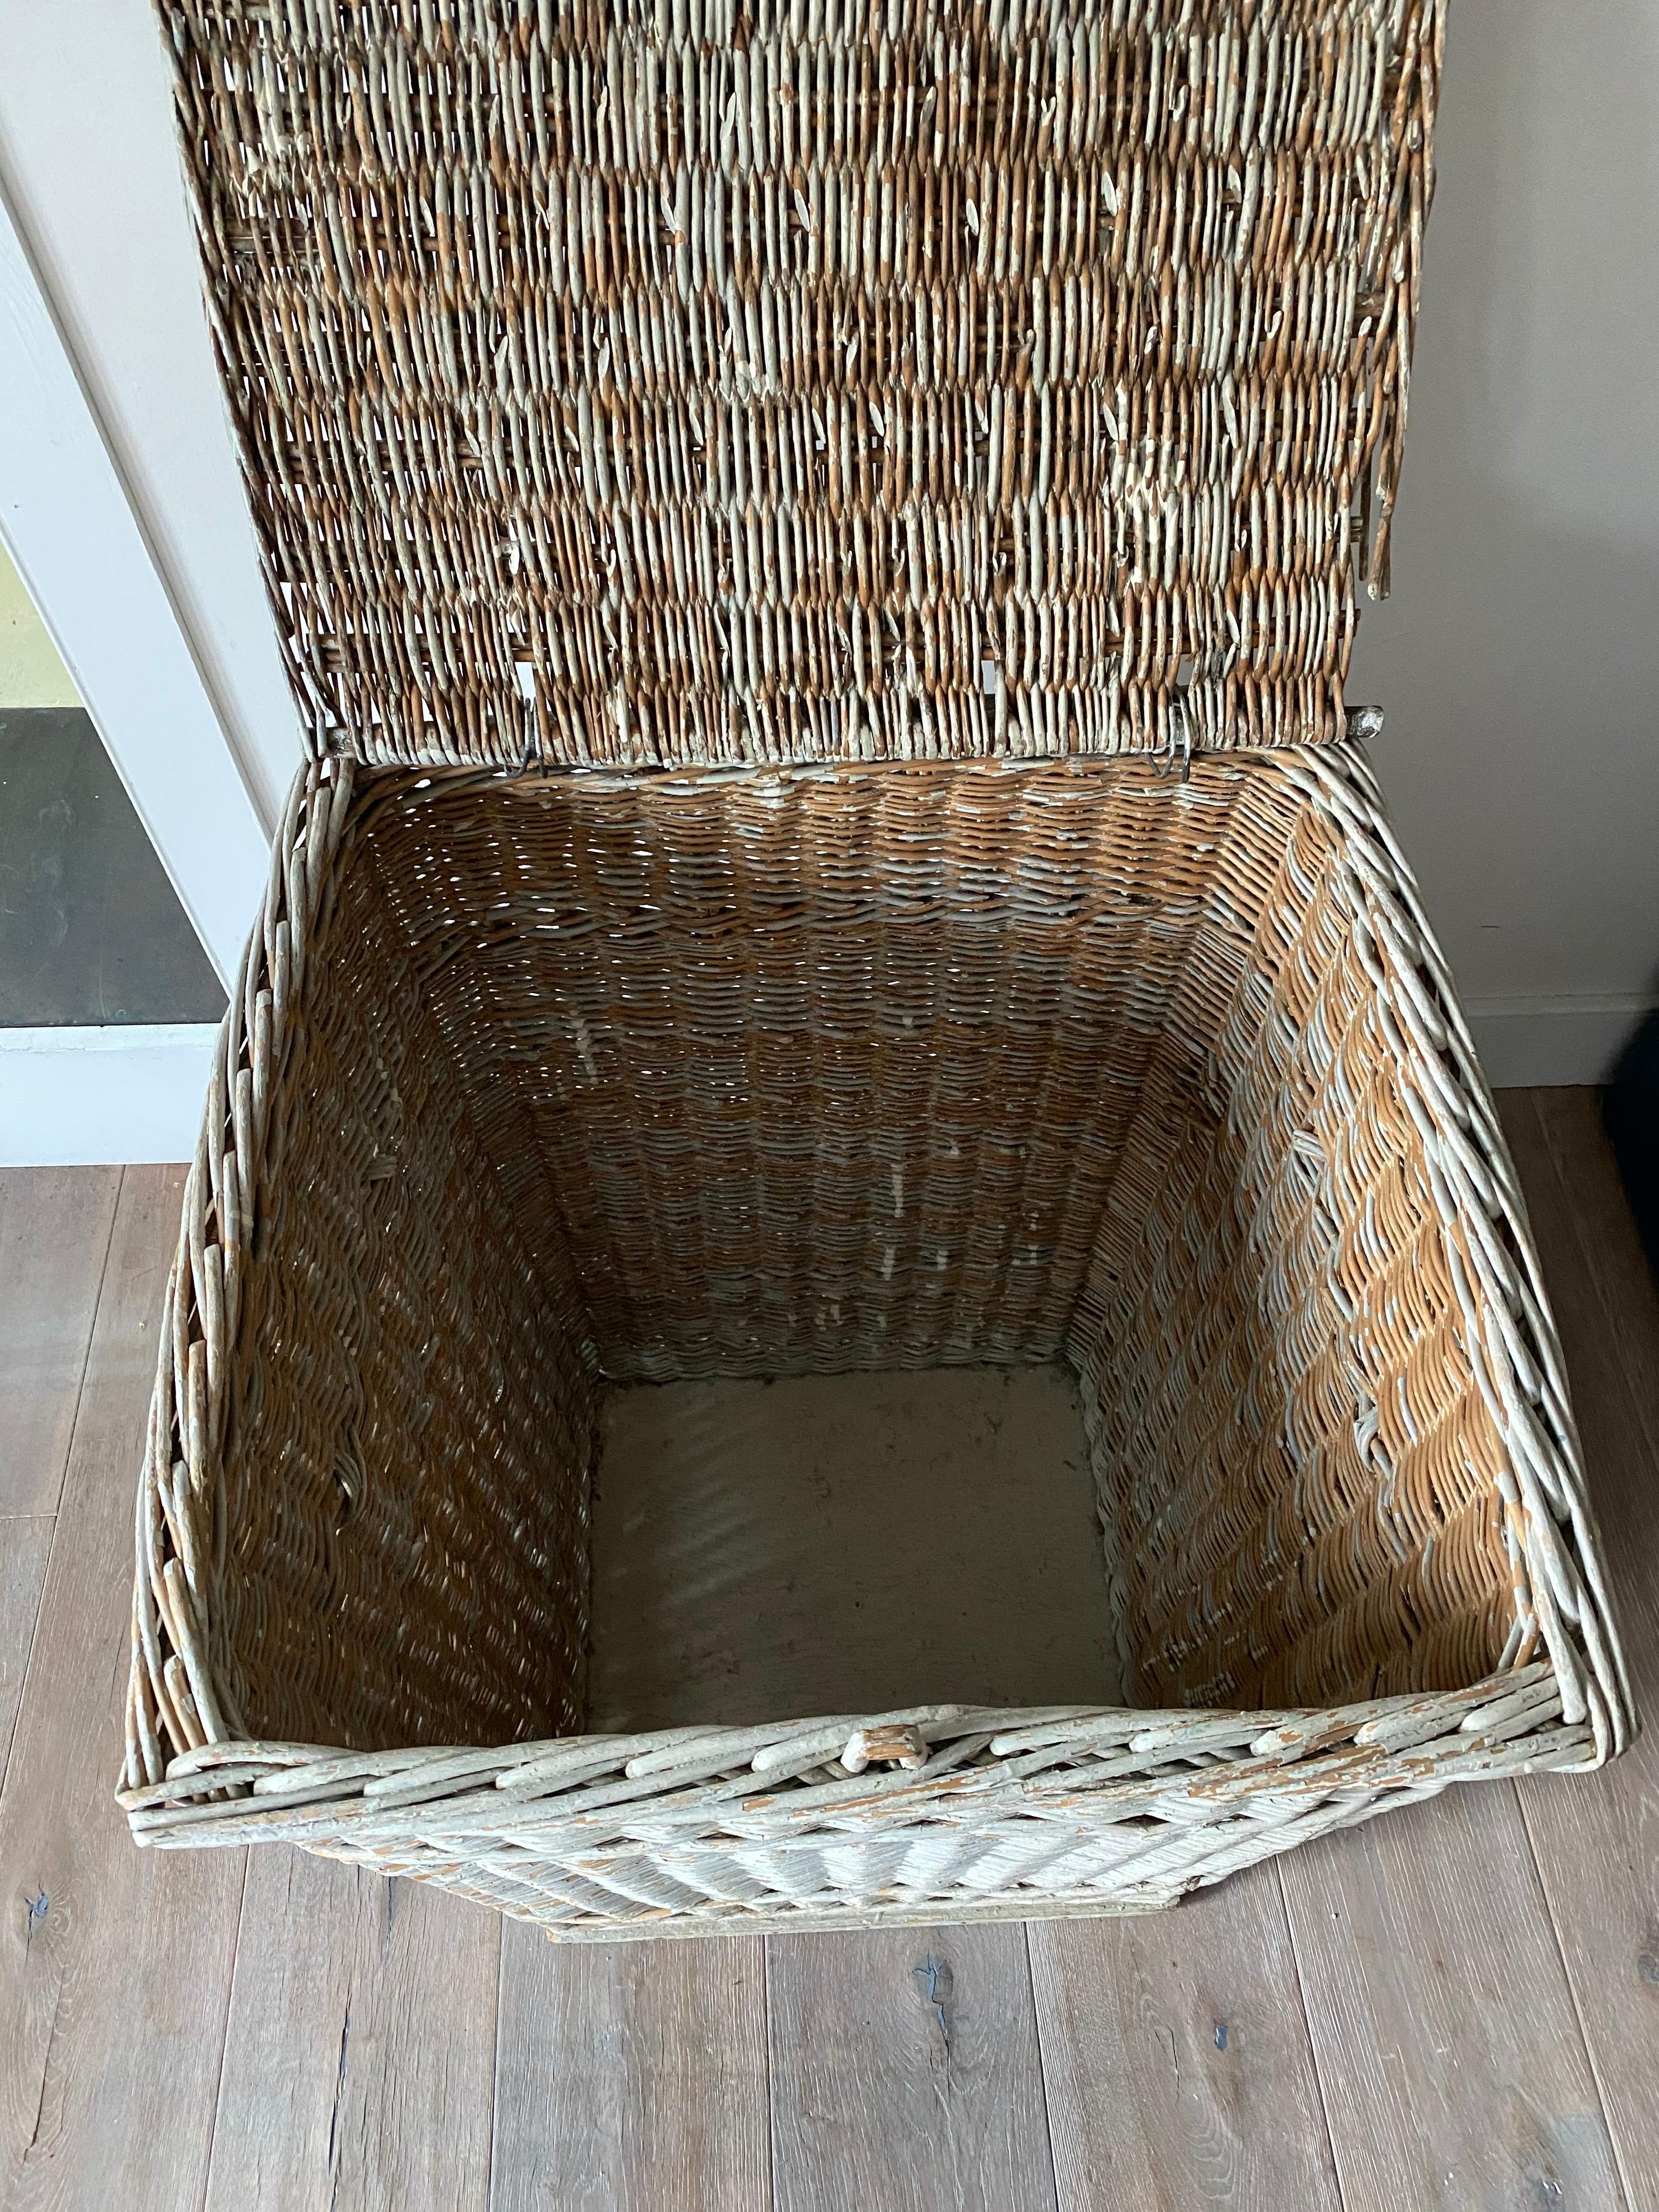 Painted Large Rustic Wicker Basket For Sale